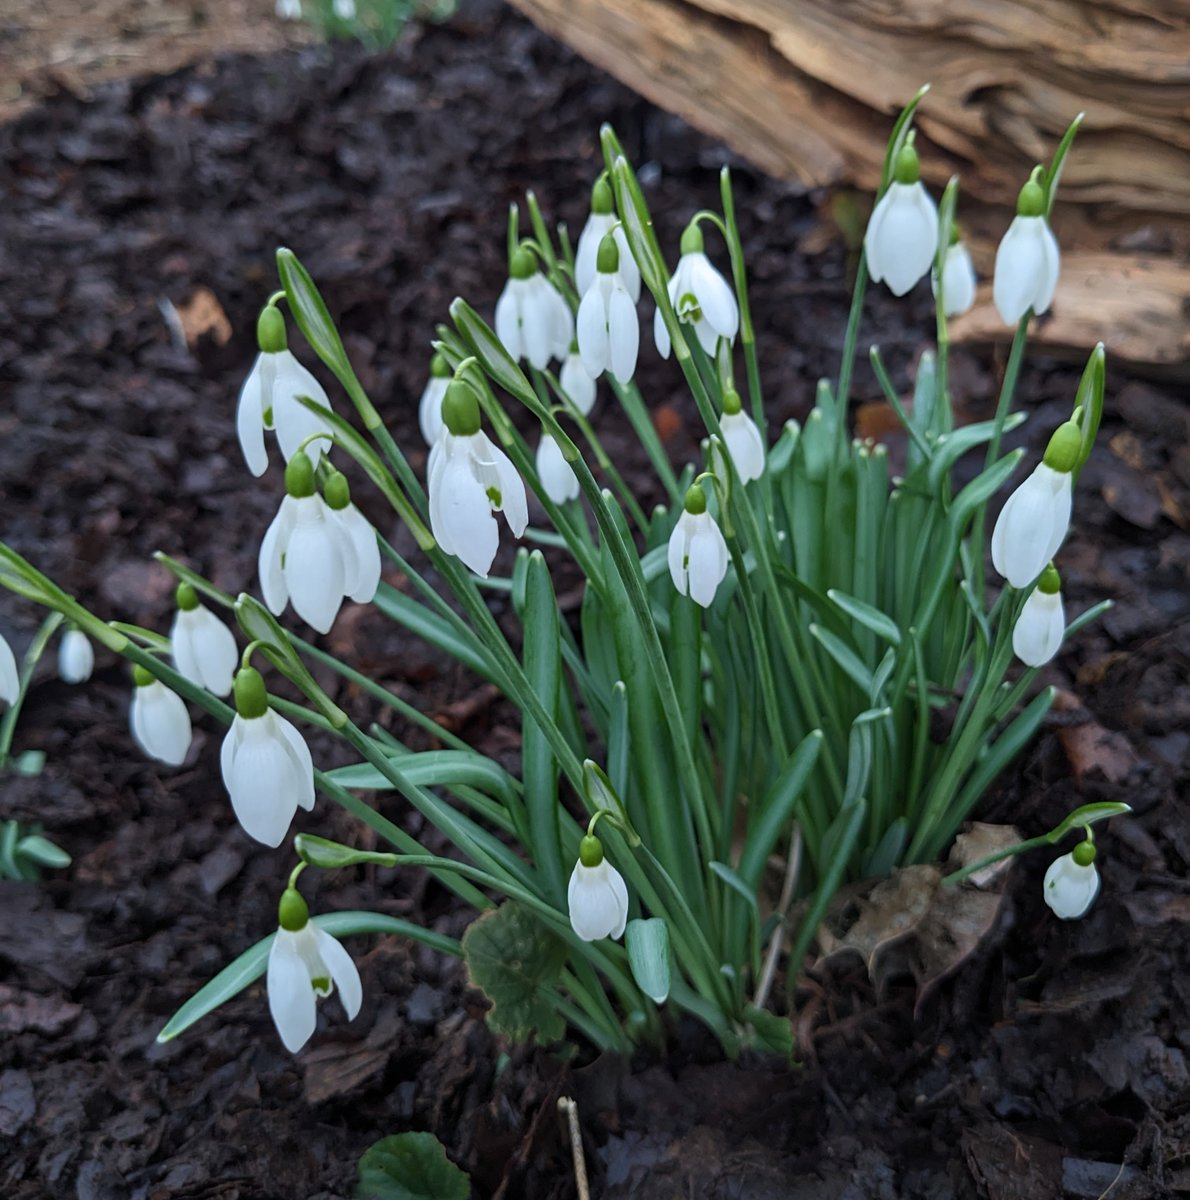 I posted this picture of plain old Galanthus nivalis (snowdrops, of course) on Facebook two days ago - seems to have notched up 1500 likes. No idea why, but I thought you might like it too. Nicely set off by our home-made leaf mould, beautifully applied by @StephenGByrne